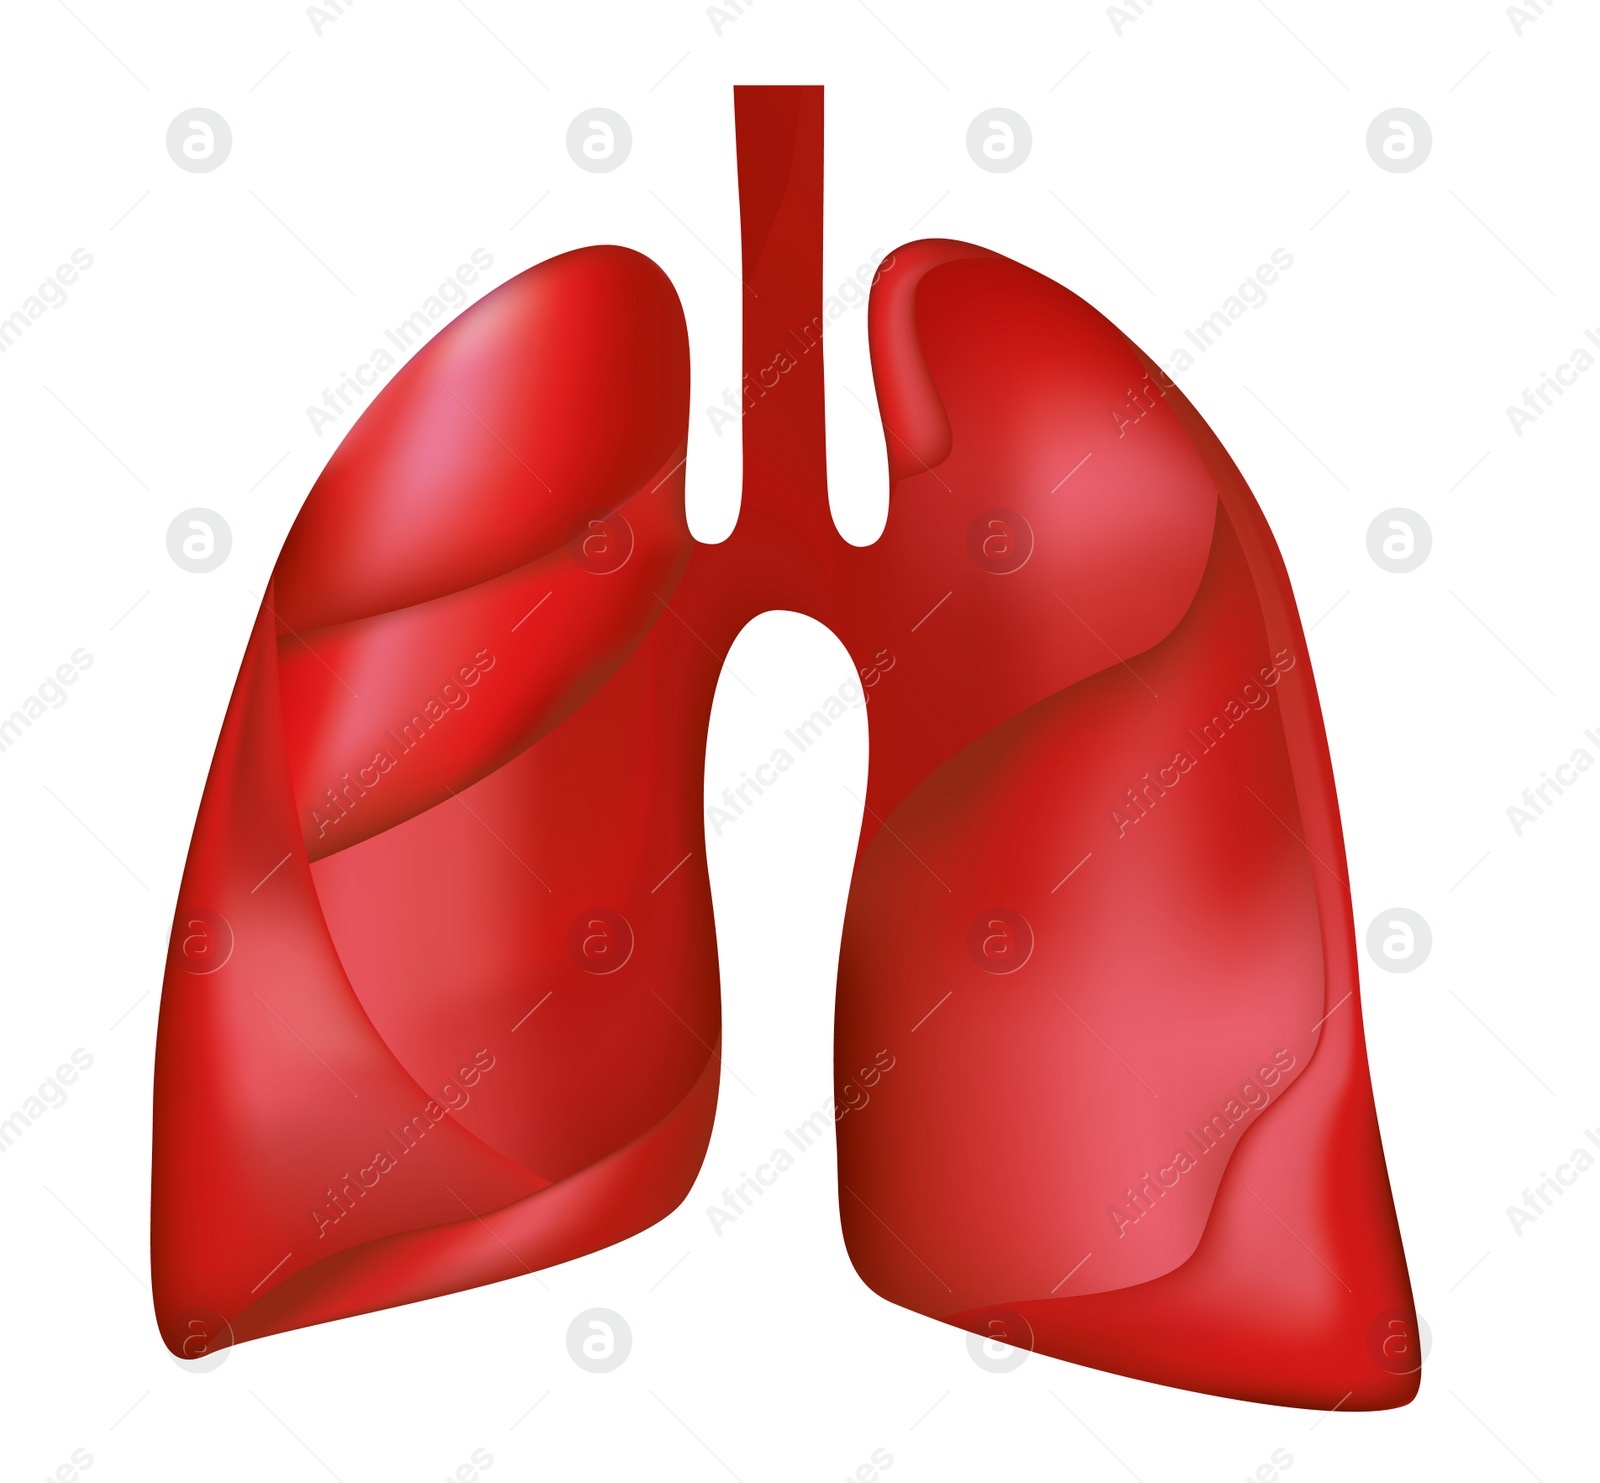 Illustration of  human lungs on white background